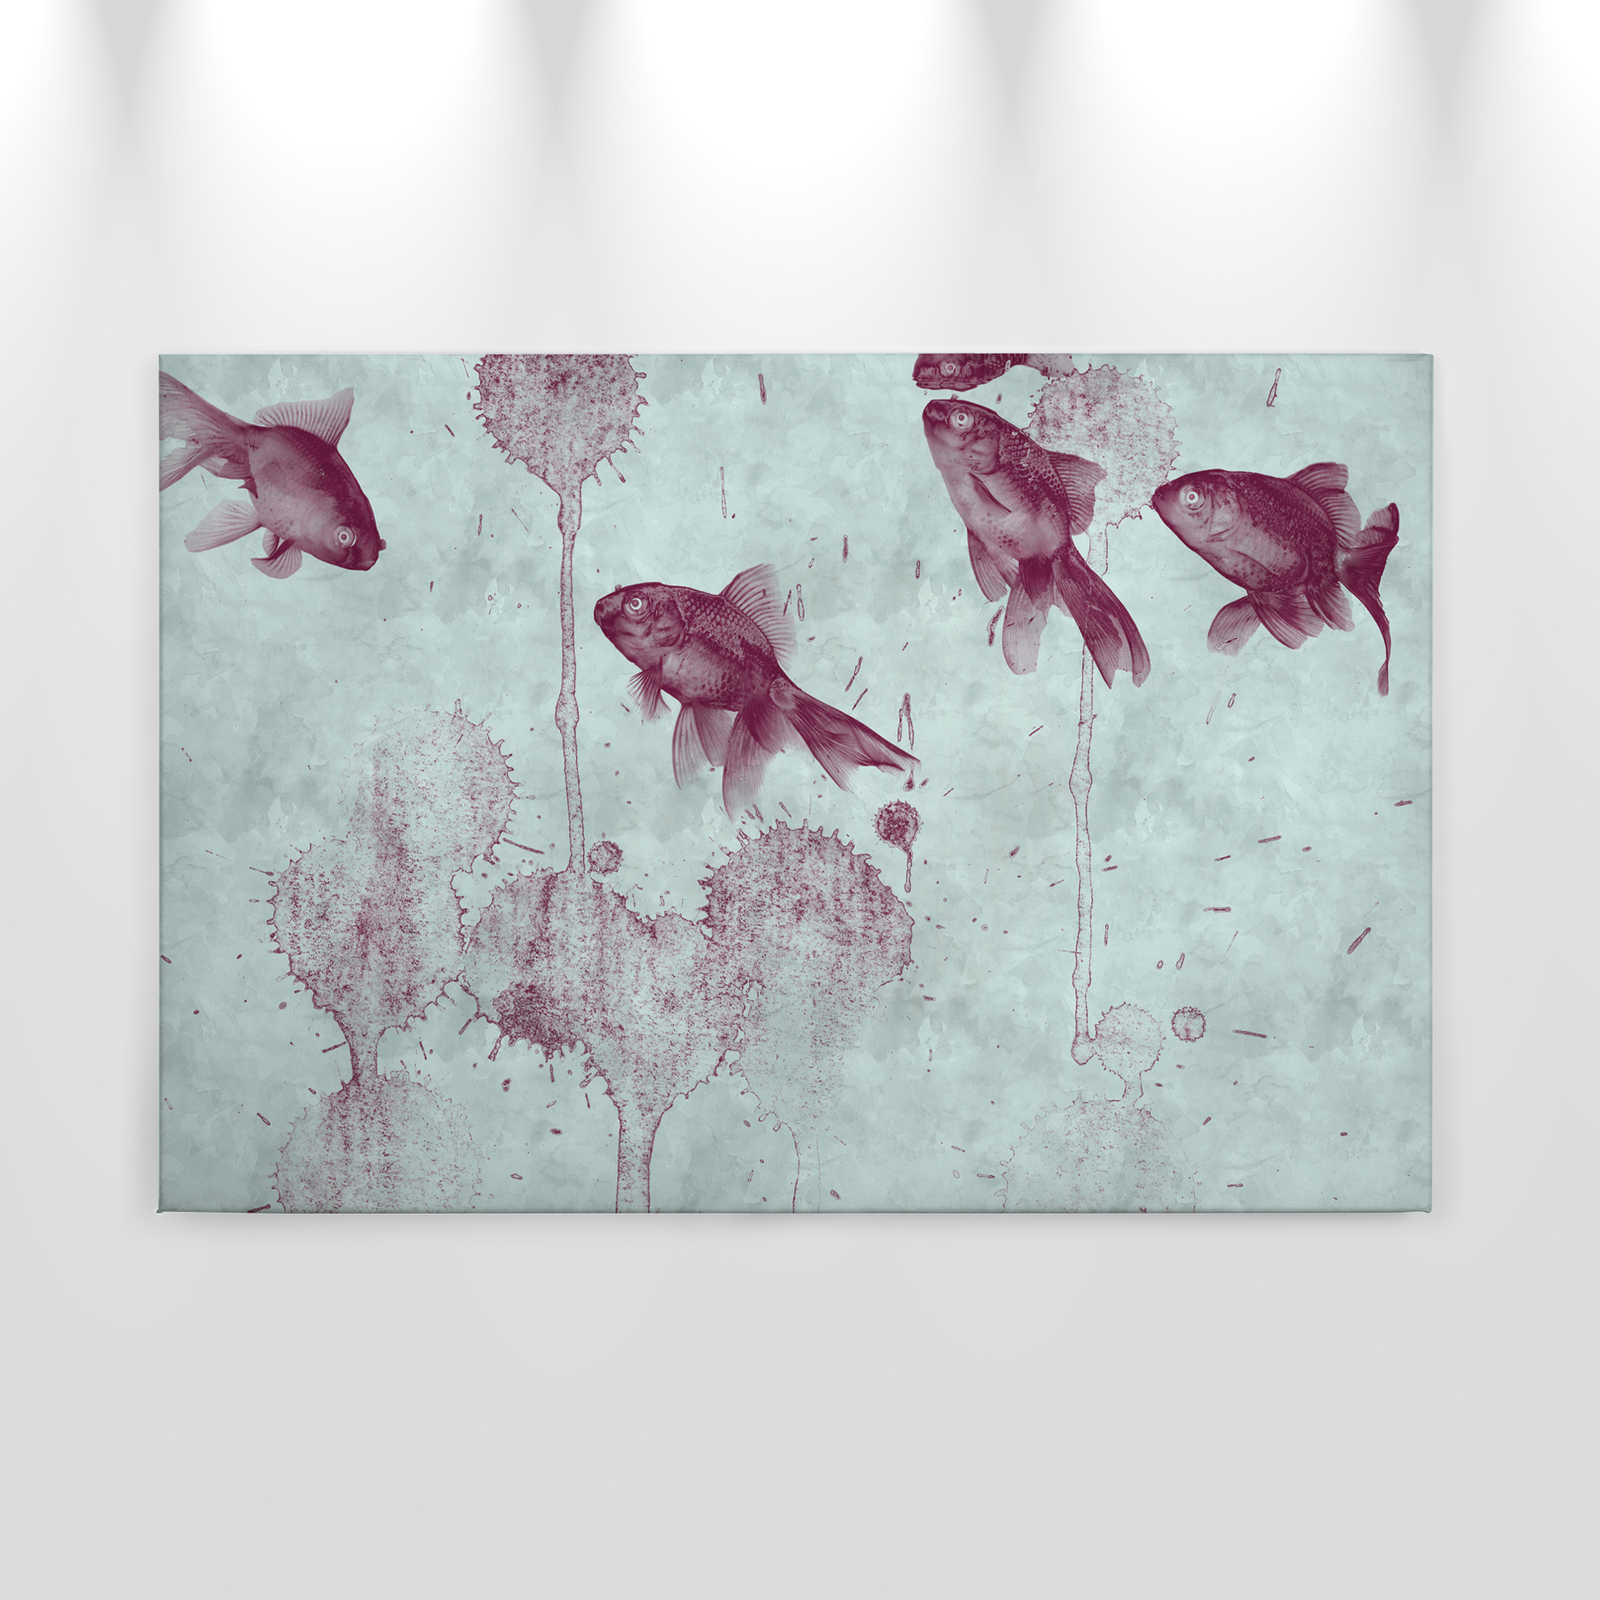             moderness Canvas painting Fish Design in Watercolour Style - 0,90 m x 0,60 m
        